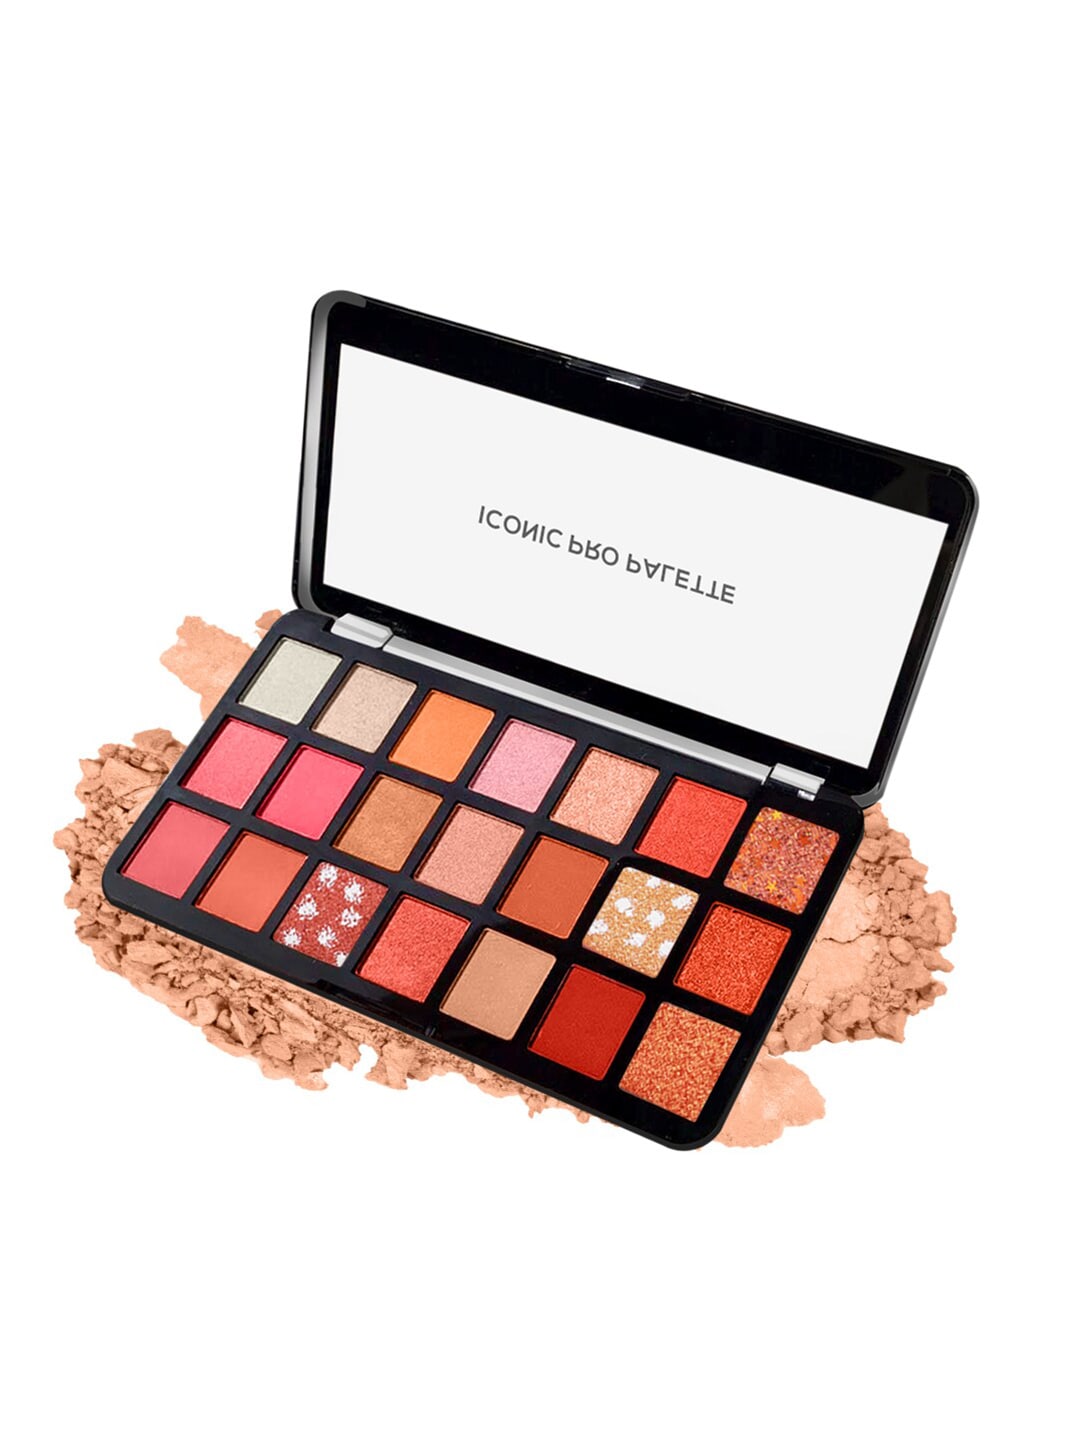 Sivanna Colors Iconic Pro Multi Eyeshadow Palette Price in India